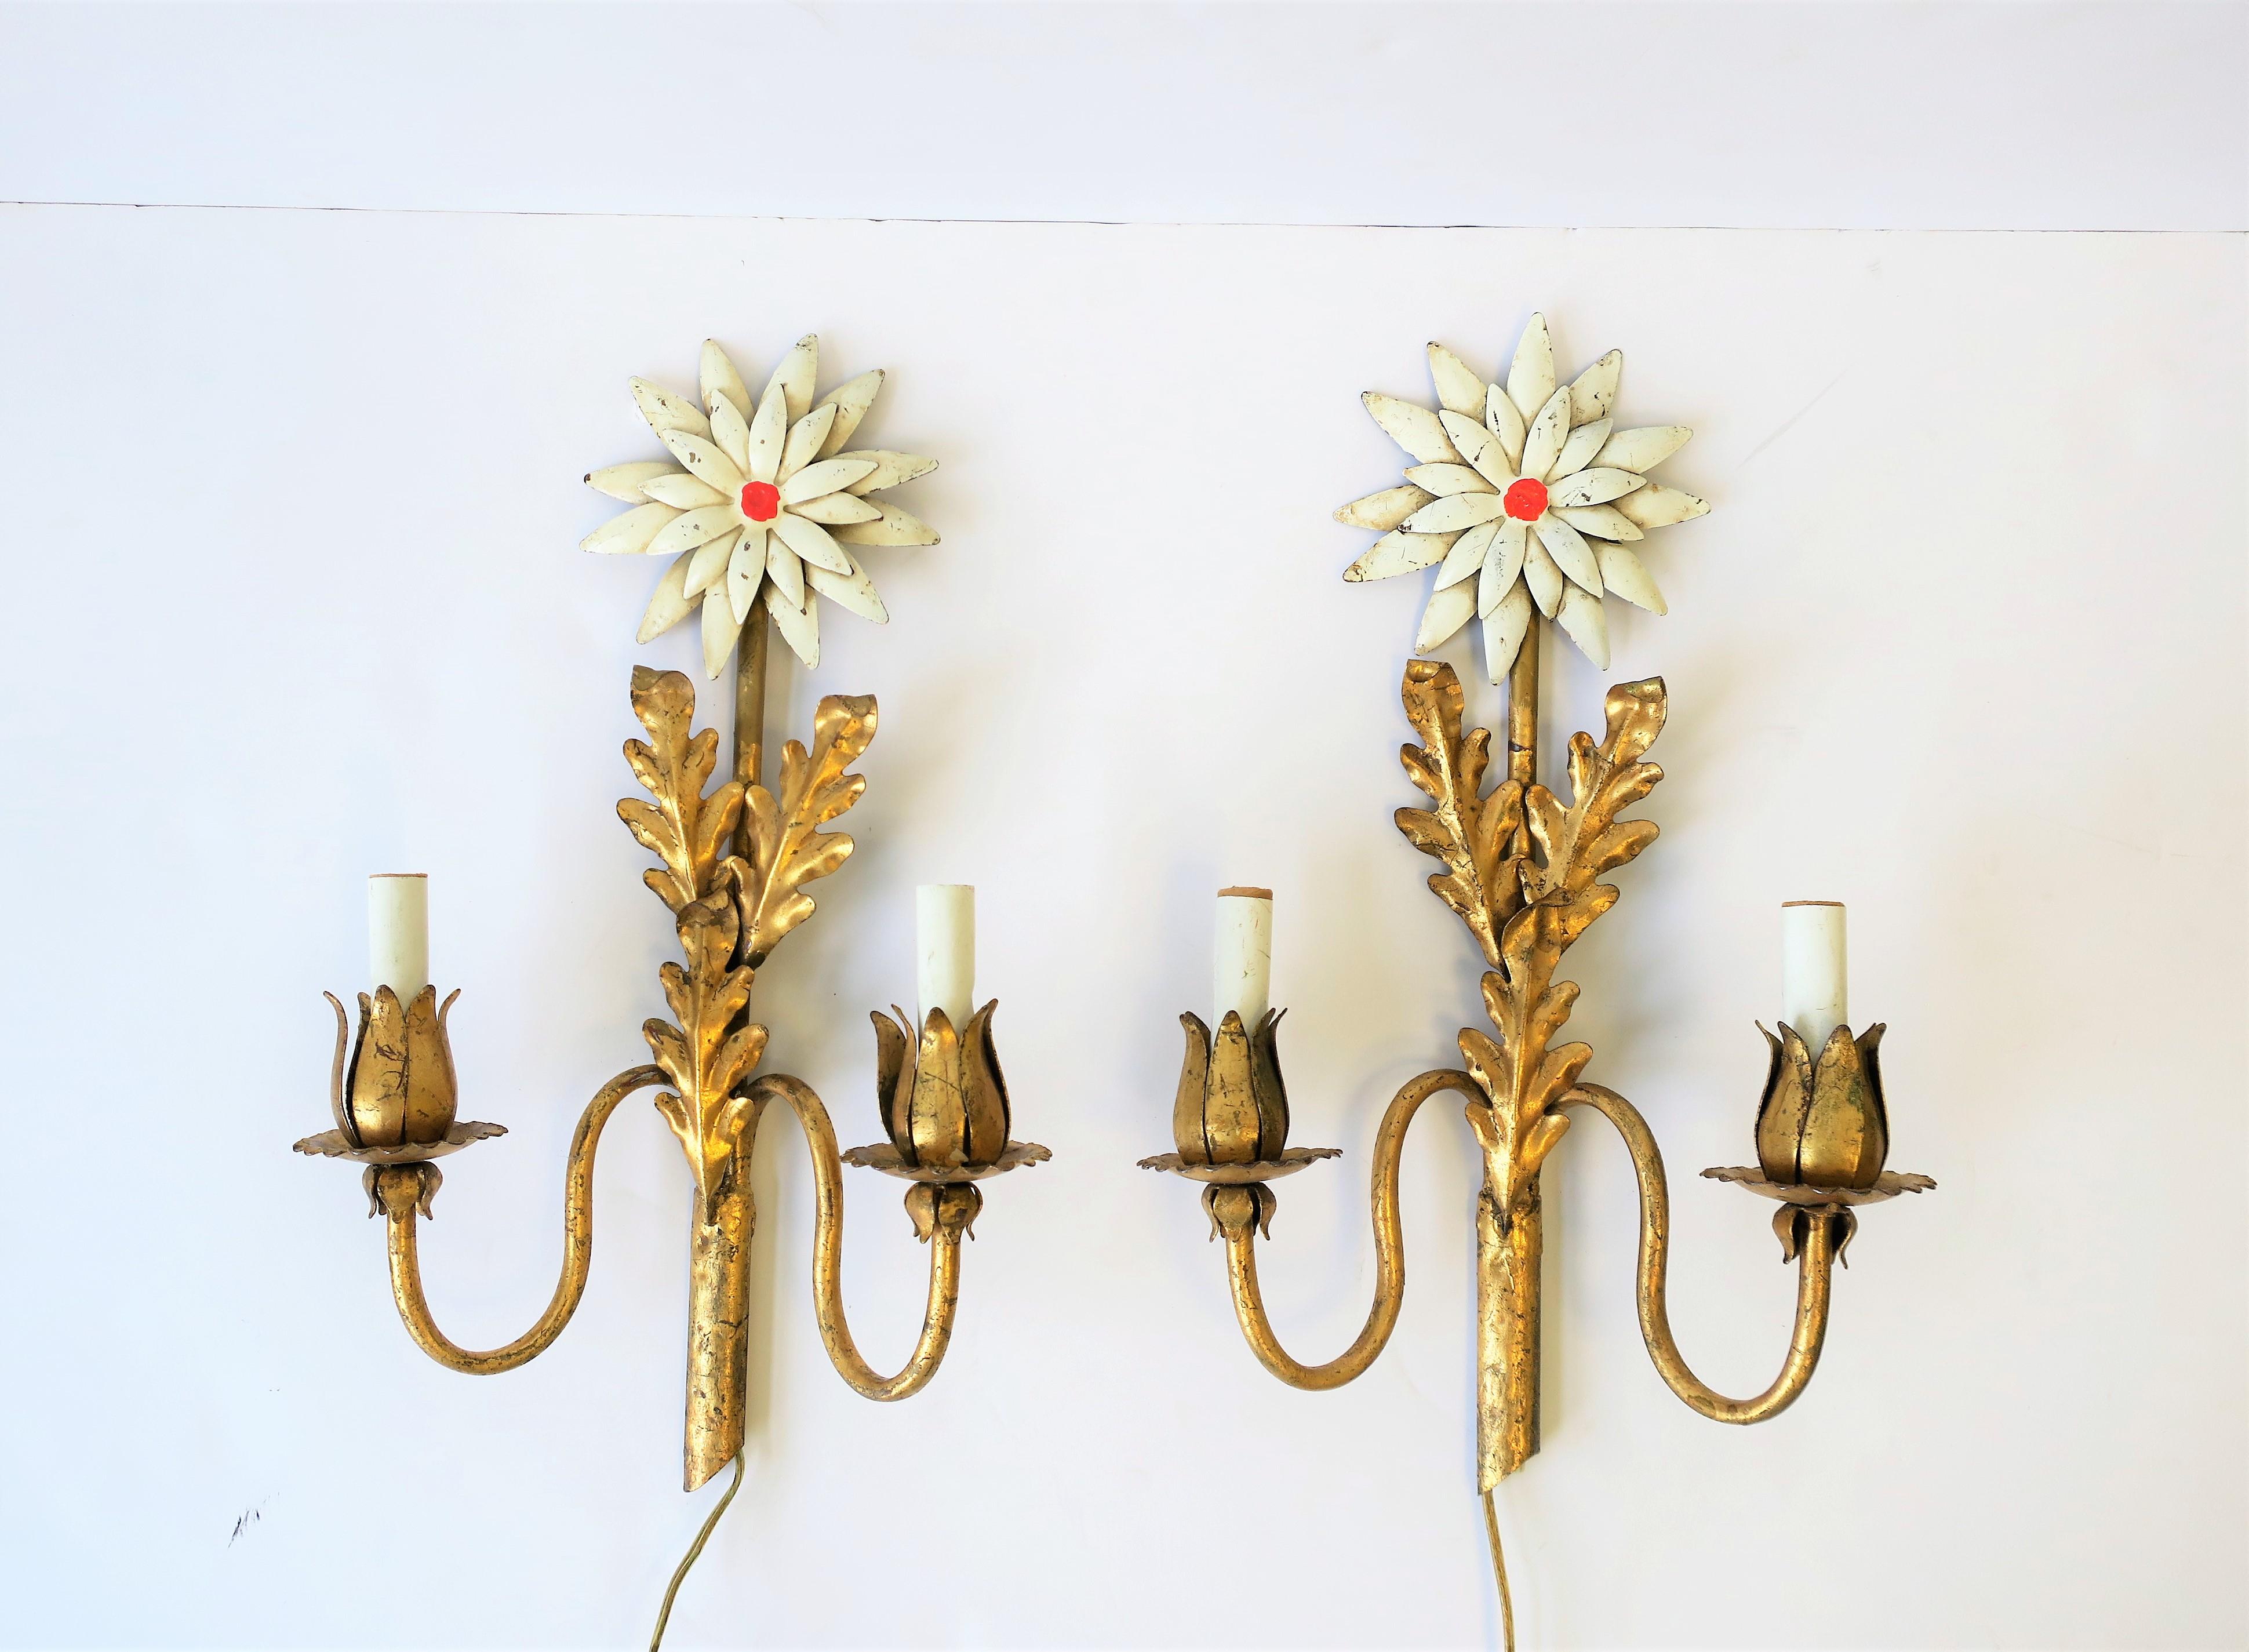 A beautiful and rare pair of midcentury Italian gold gilt tole metal wall lights or wall sconces. Each have a white enamel flower with red center, gold gilt tole leaves, and two lights each with gold gilt flower petals. Pair are marked 'Made in